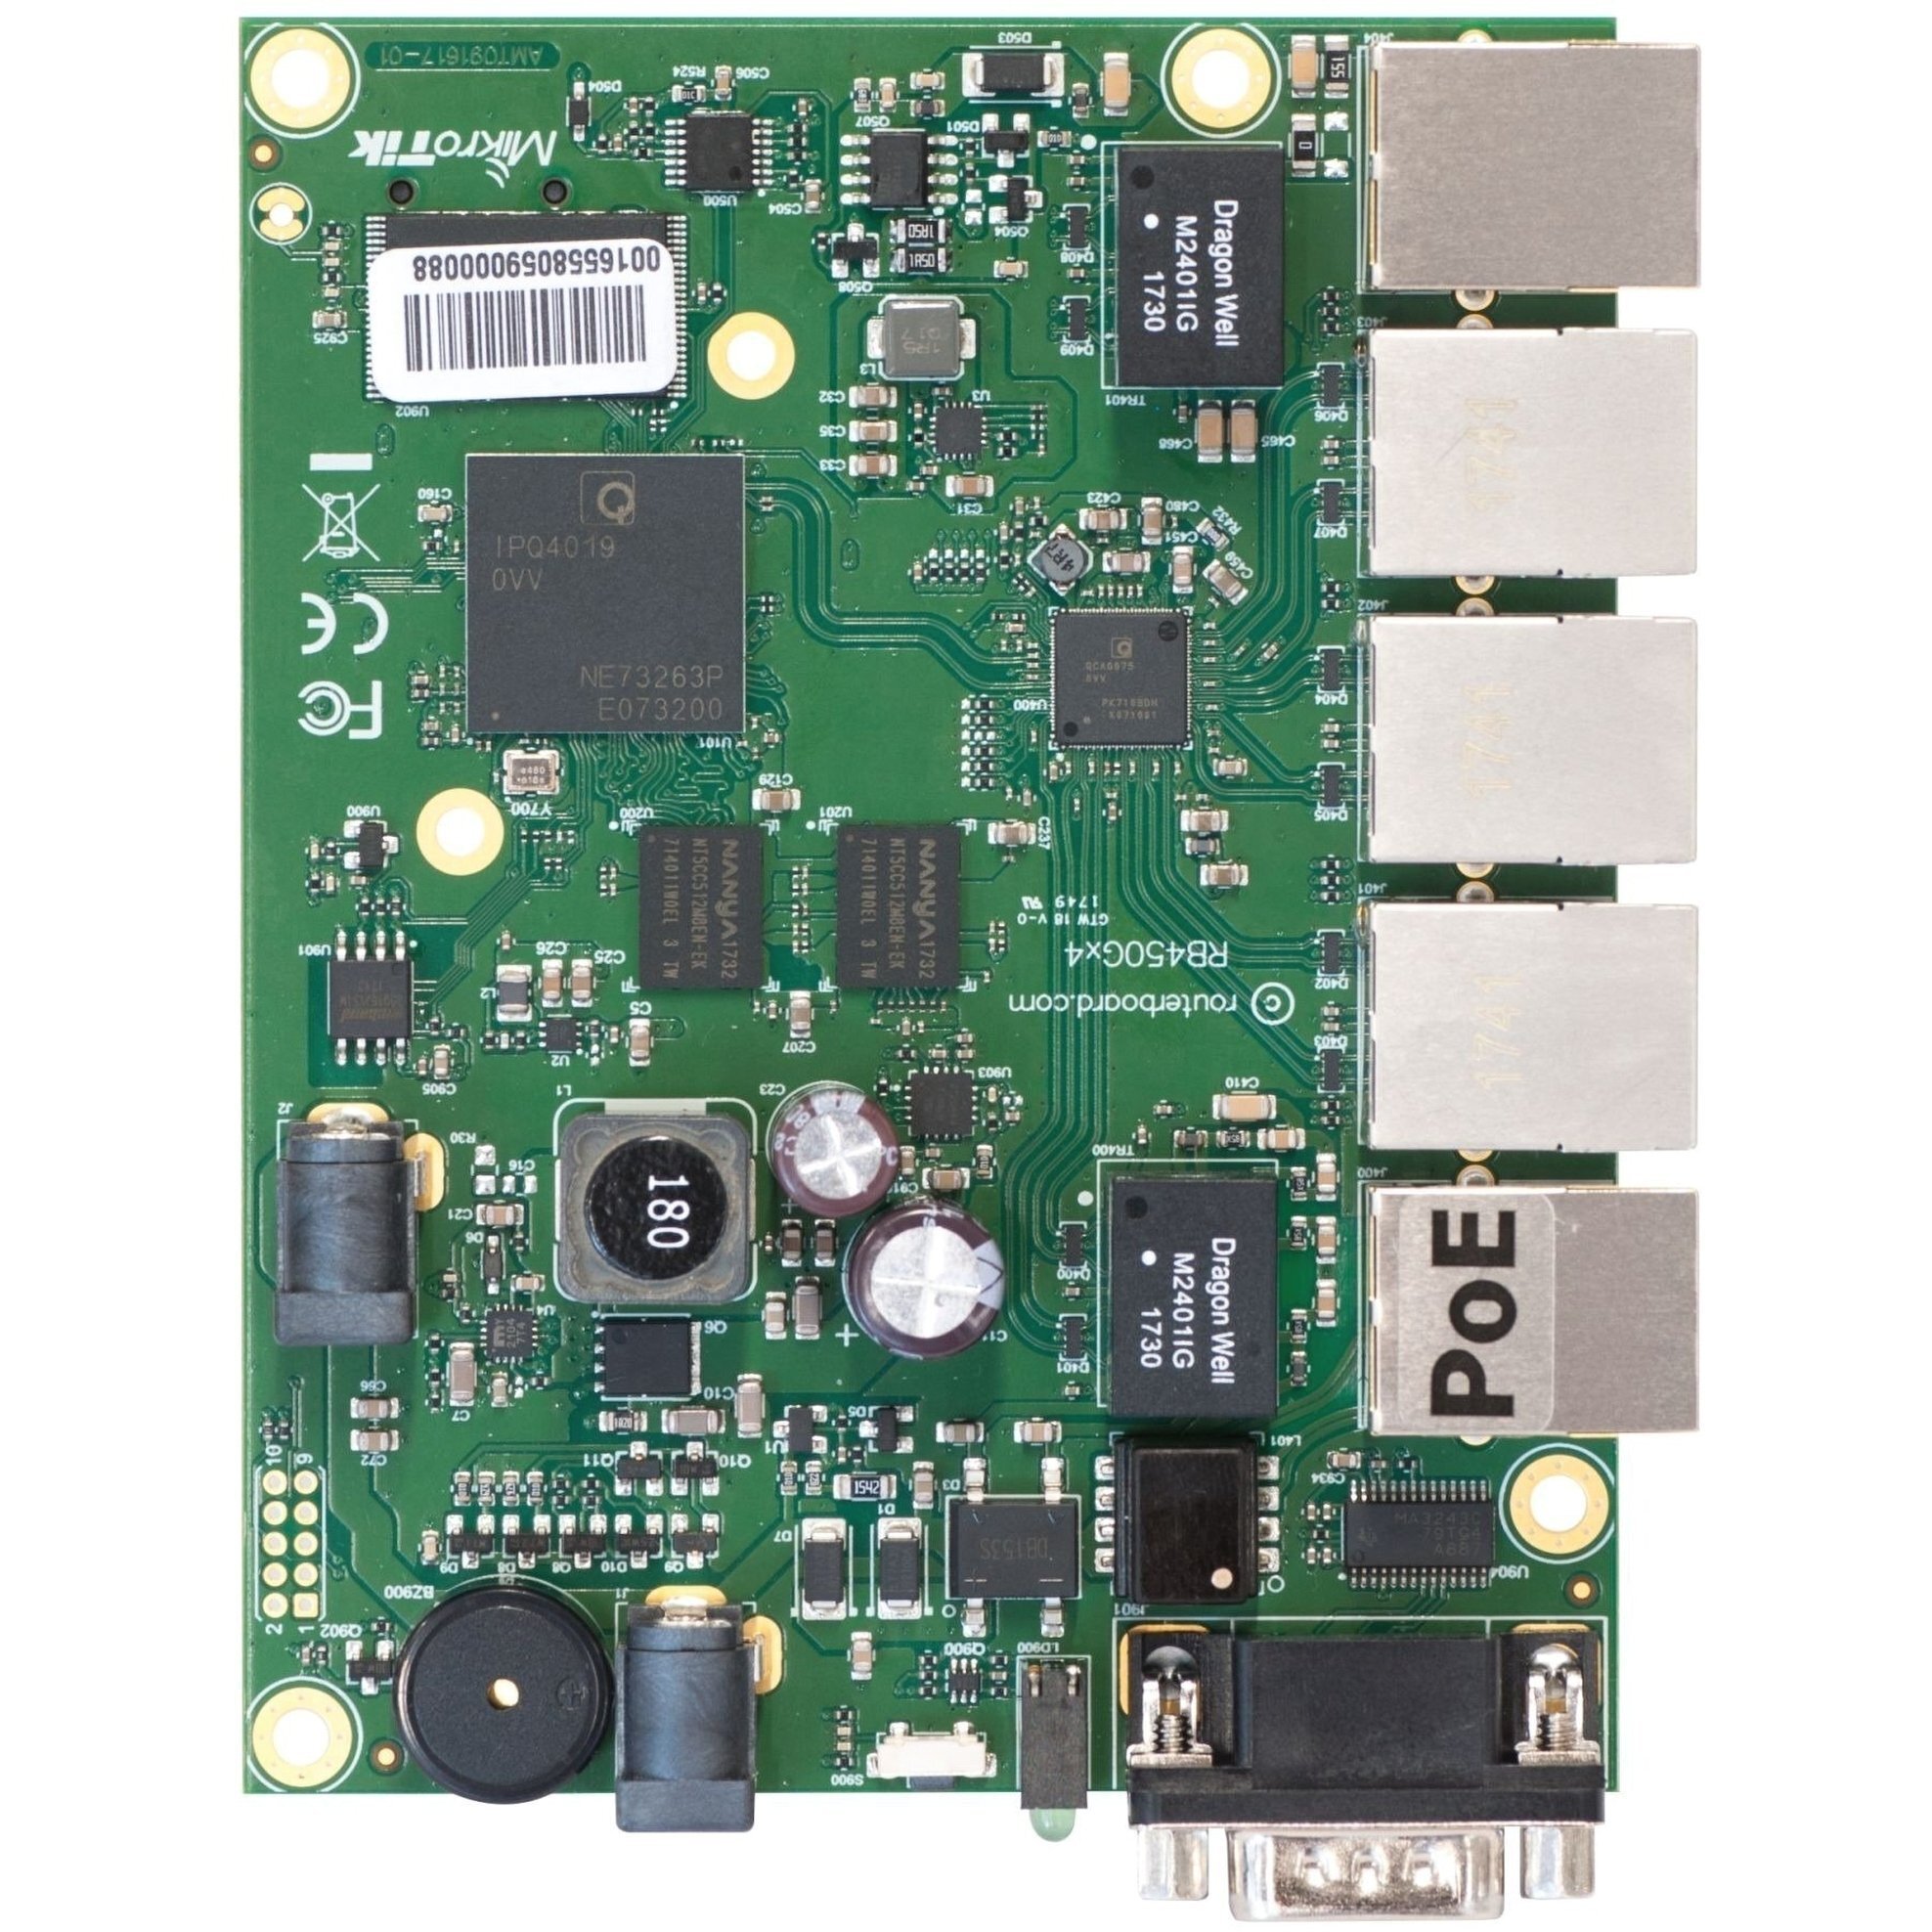 Маршрутизатор MikroTik RouterBOARD RB450Gx4 (RB450Gx4) фото 1